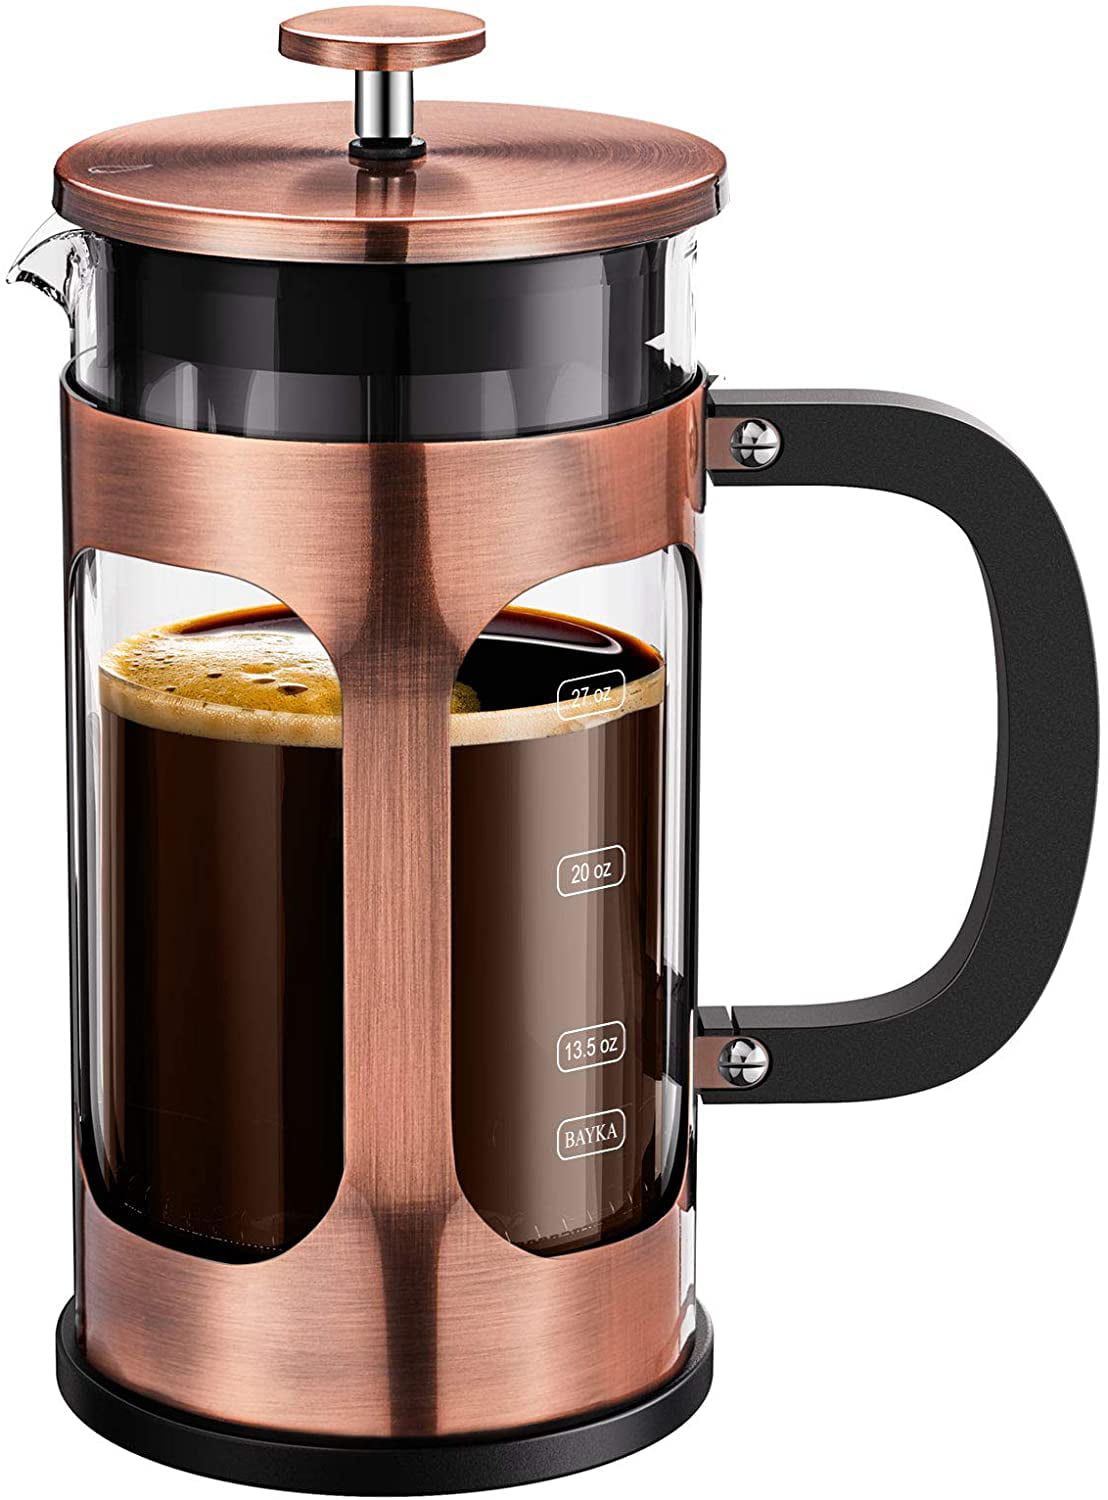 BAYKA US French Press Coffee Maker, 34 Ounce,Glass & Stainless